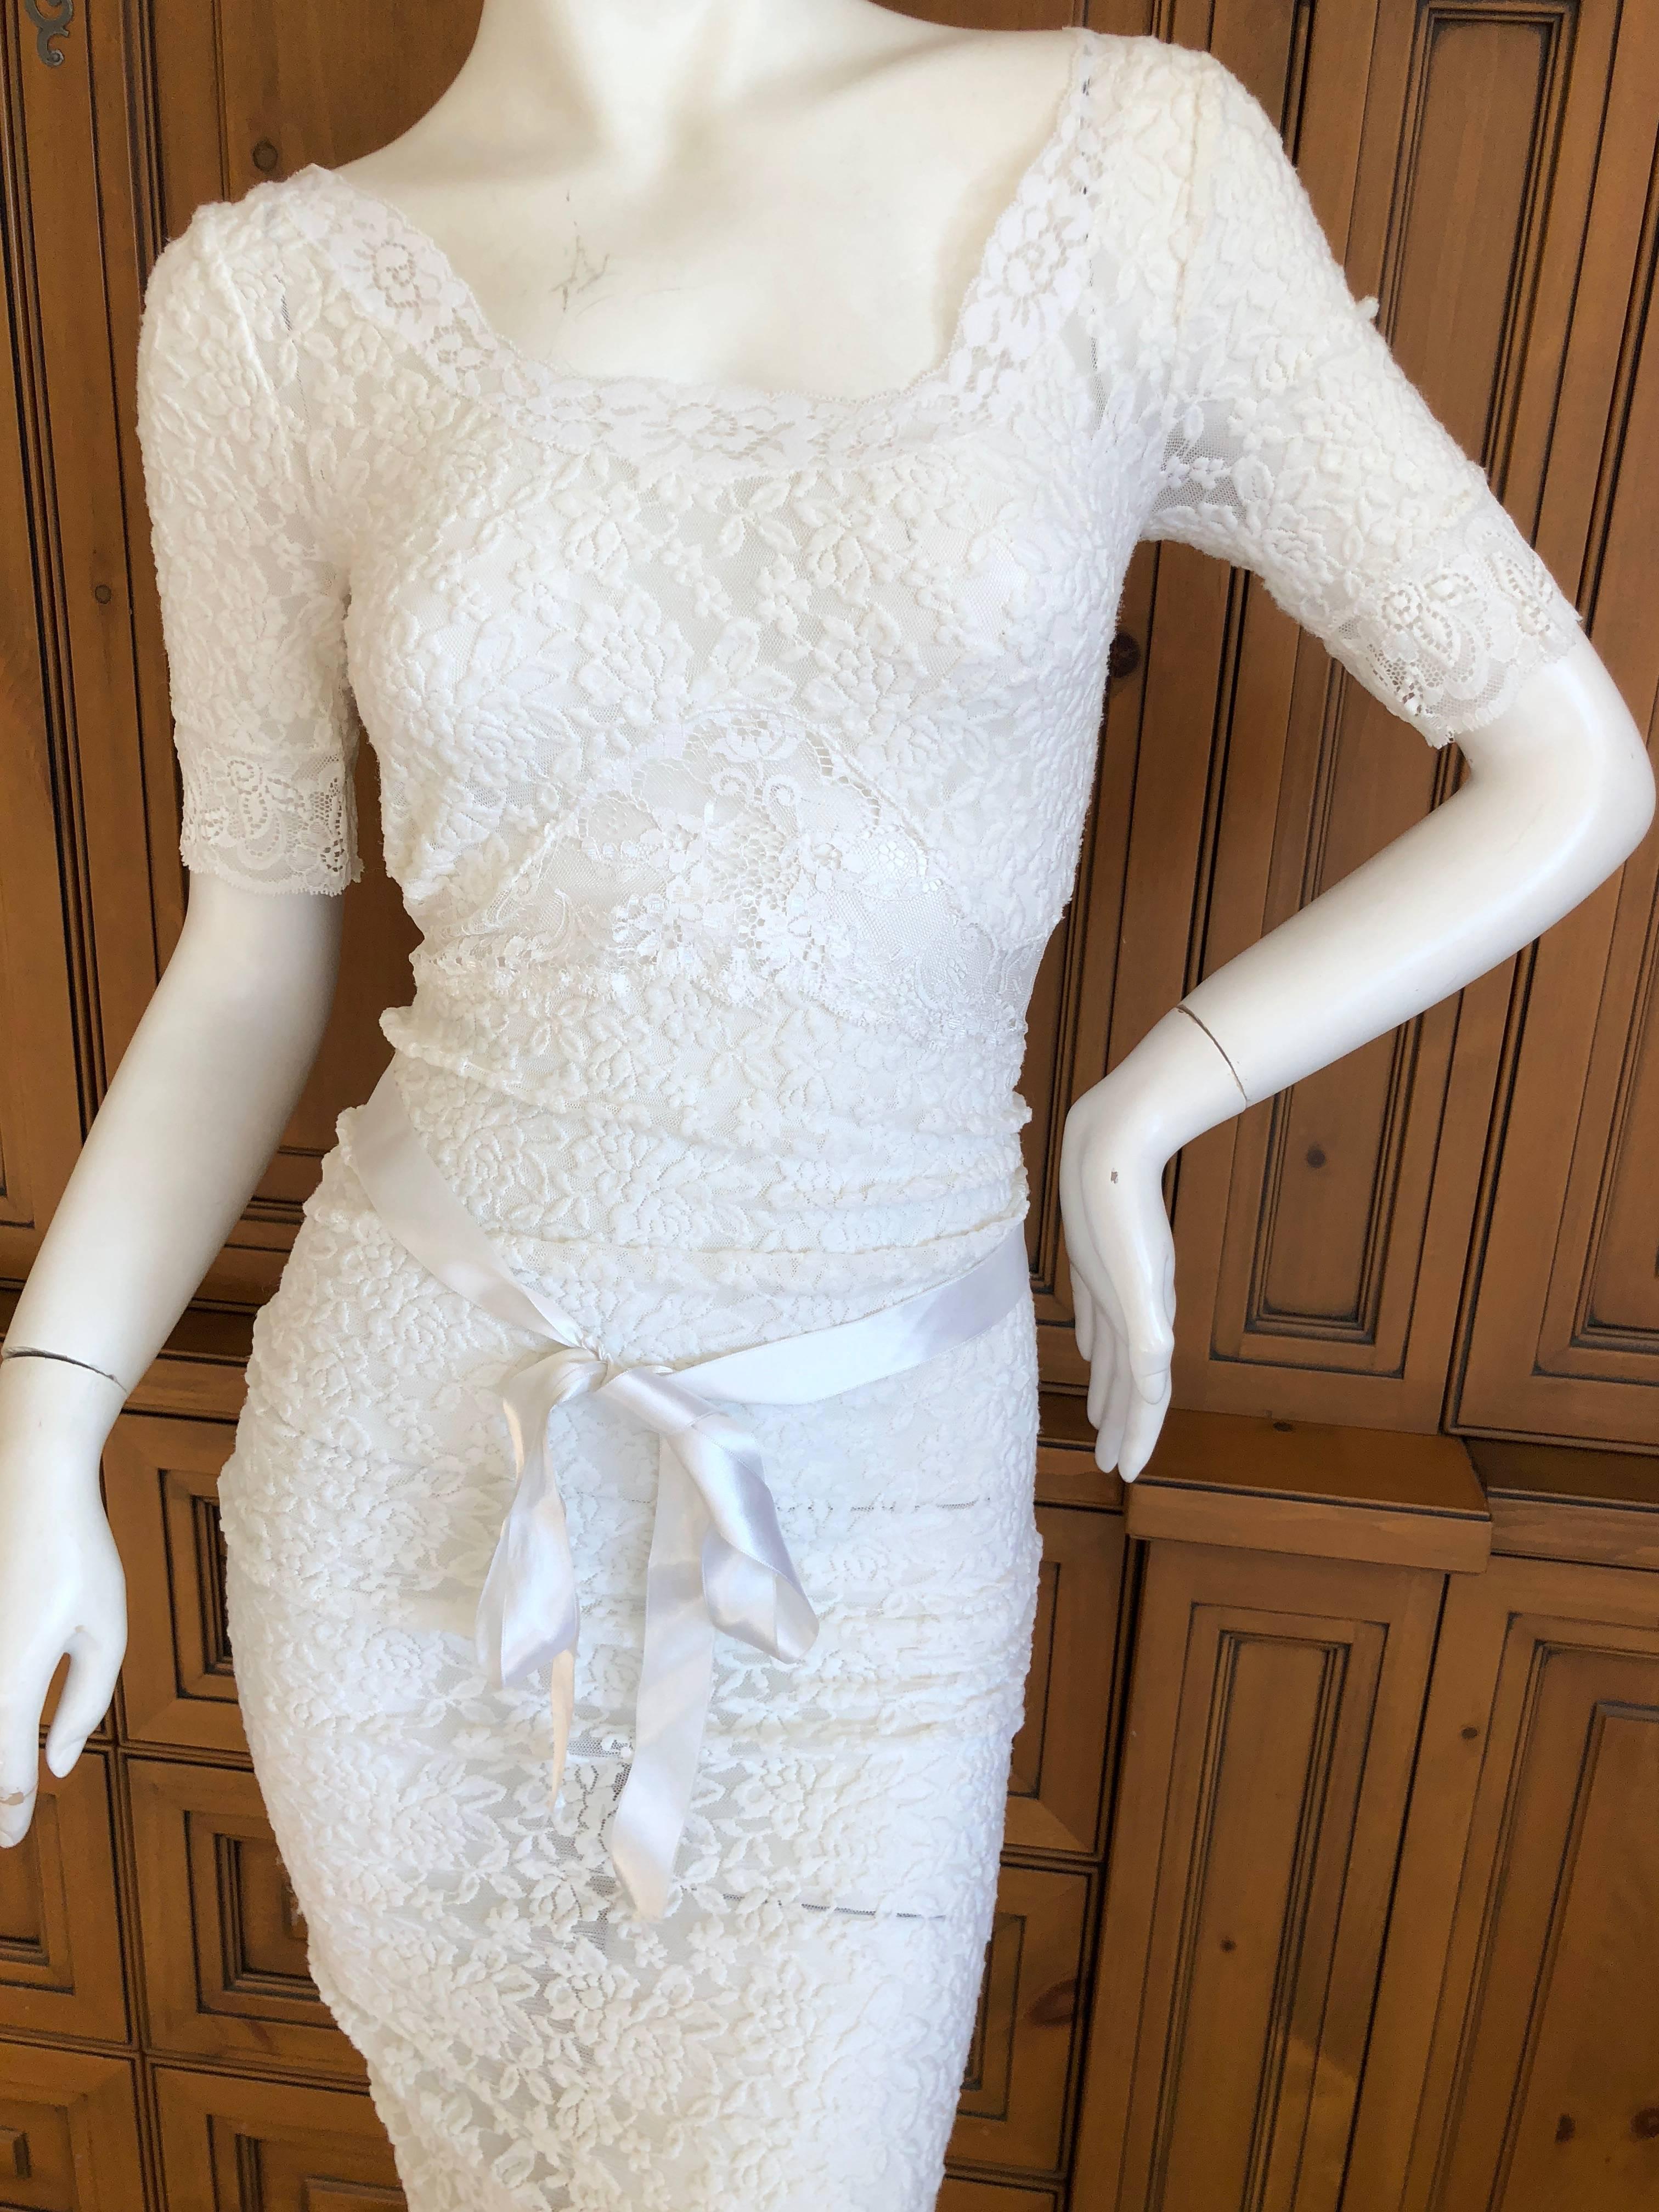 D&G Dolce & Gabbana Sheer White Lace Cocktail Dress.
Size 40
Bust 36'
Waist 28"
Hips 38'
Length 47"
Excellent condition